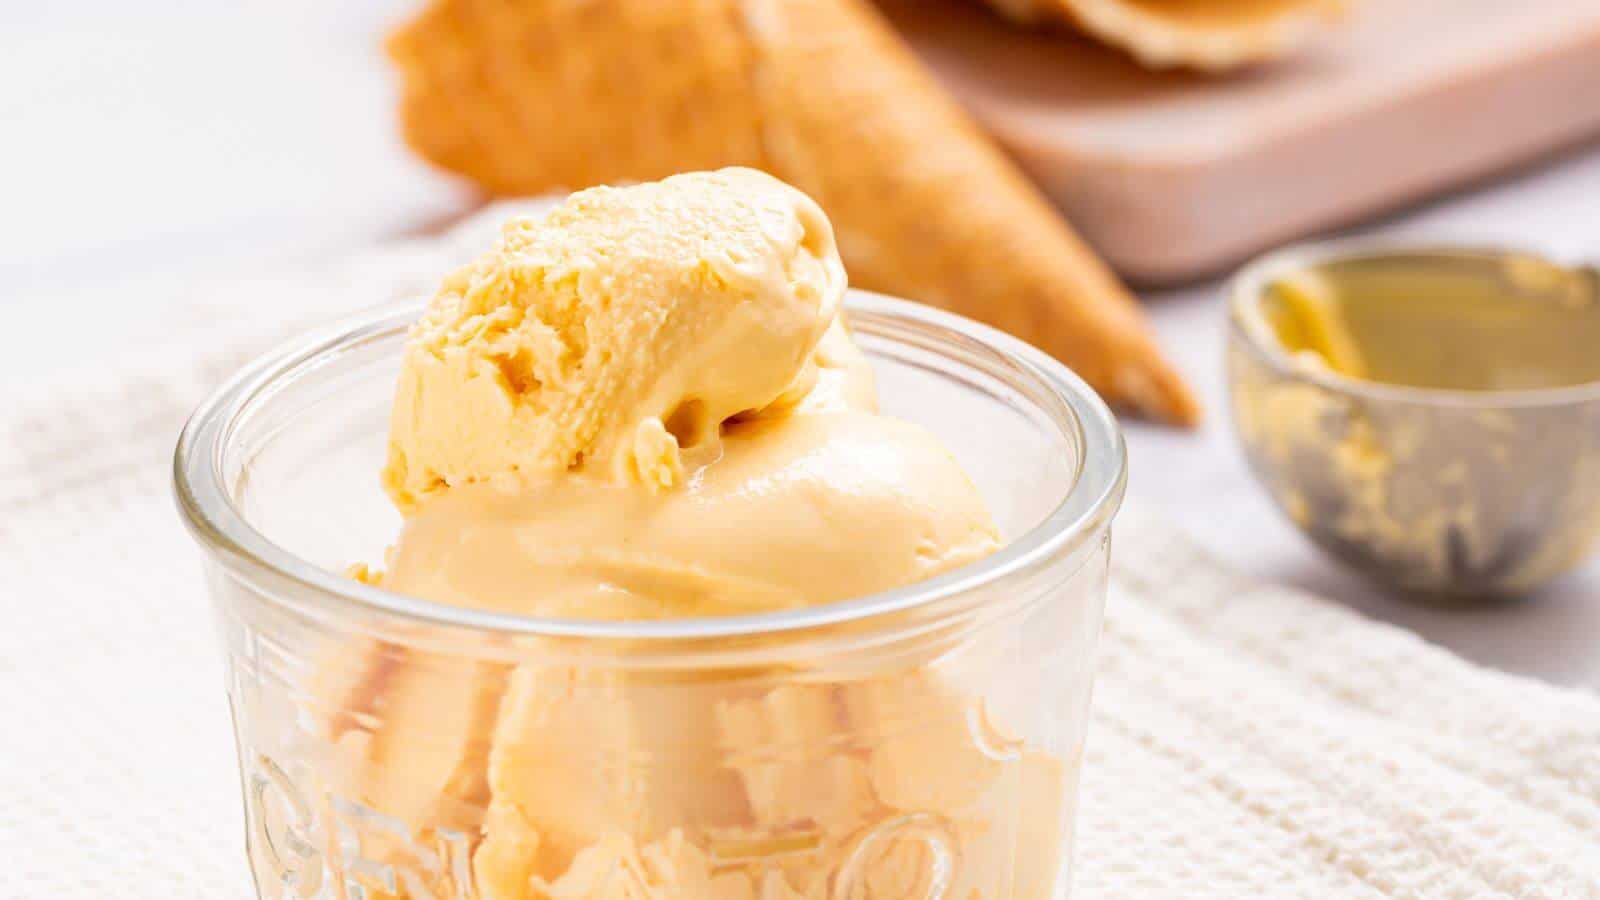 A scoop of no-churn vanilla ice cream in a glass jar, with a waffle cone and a wooden spoon in the background on a white tablecloth.